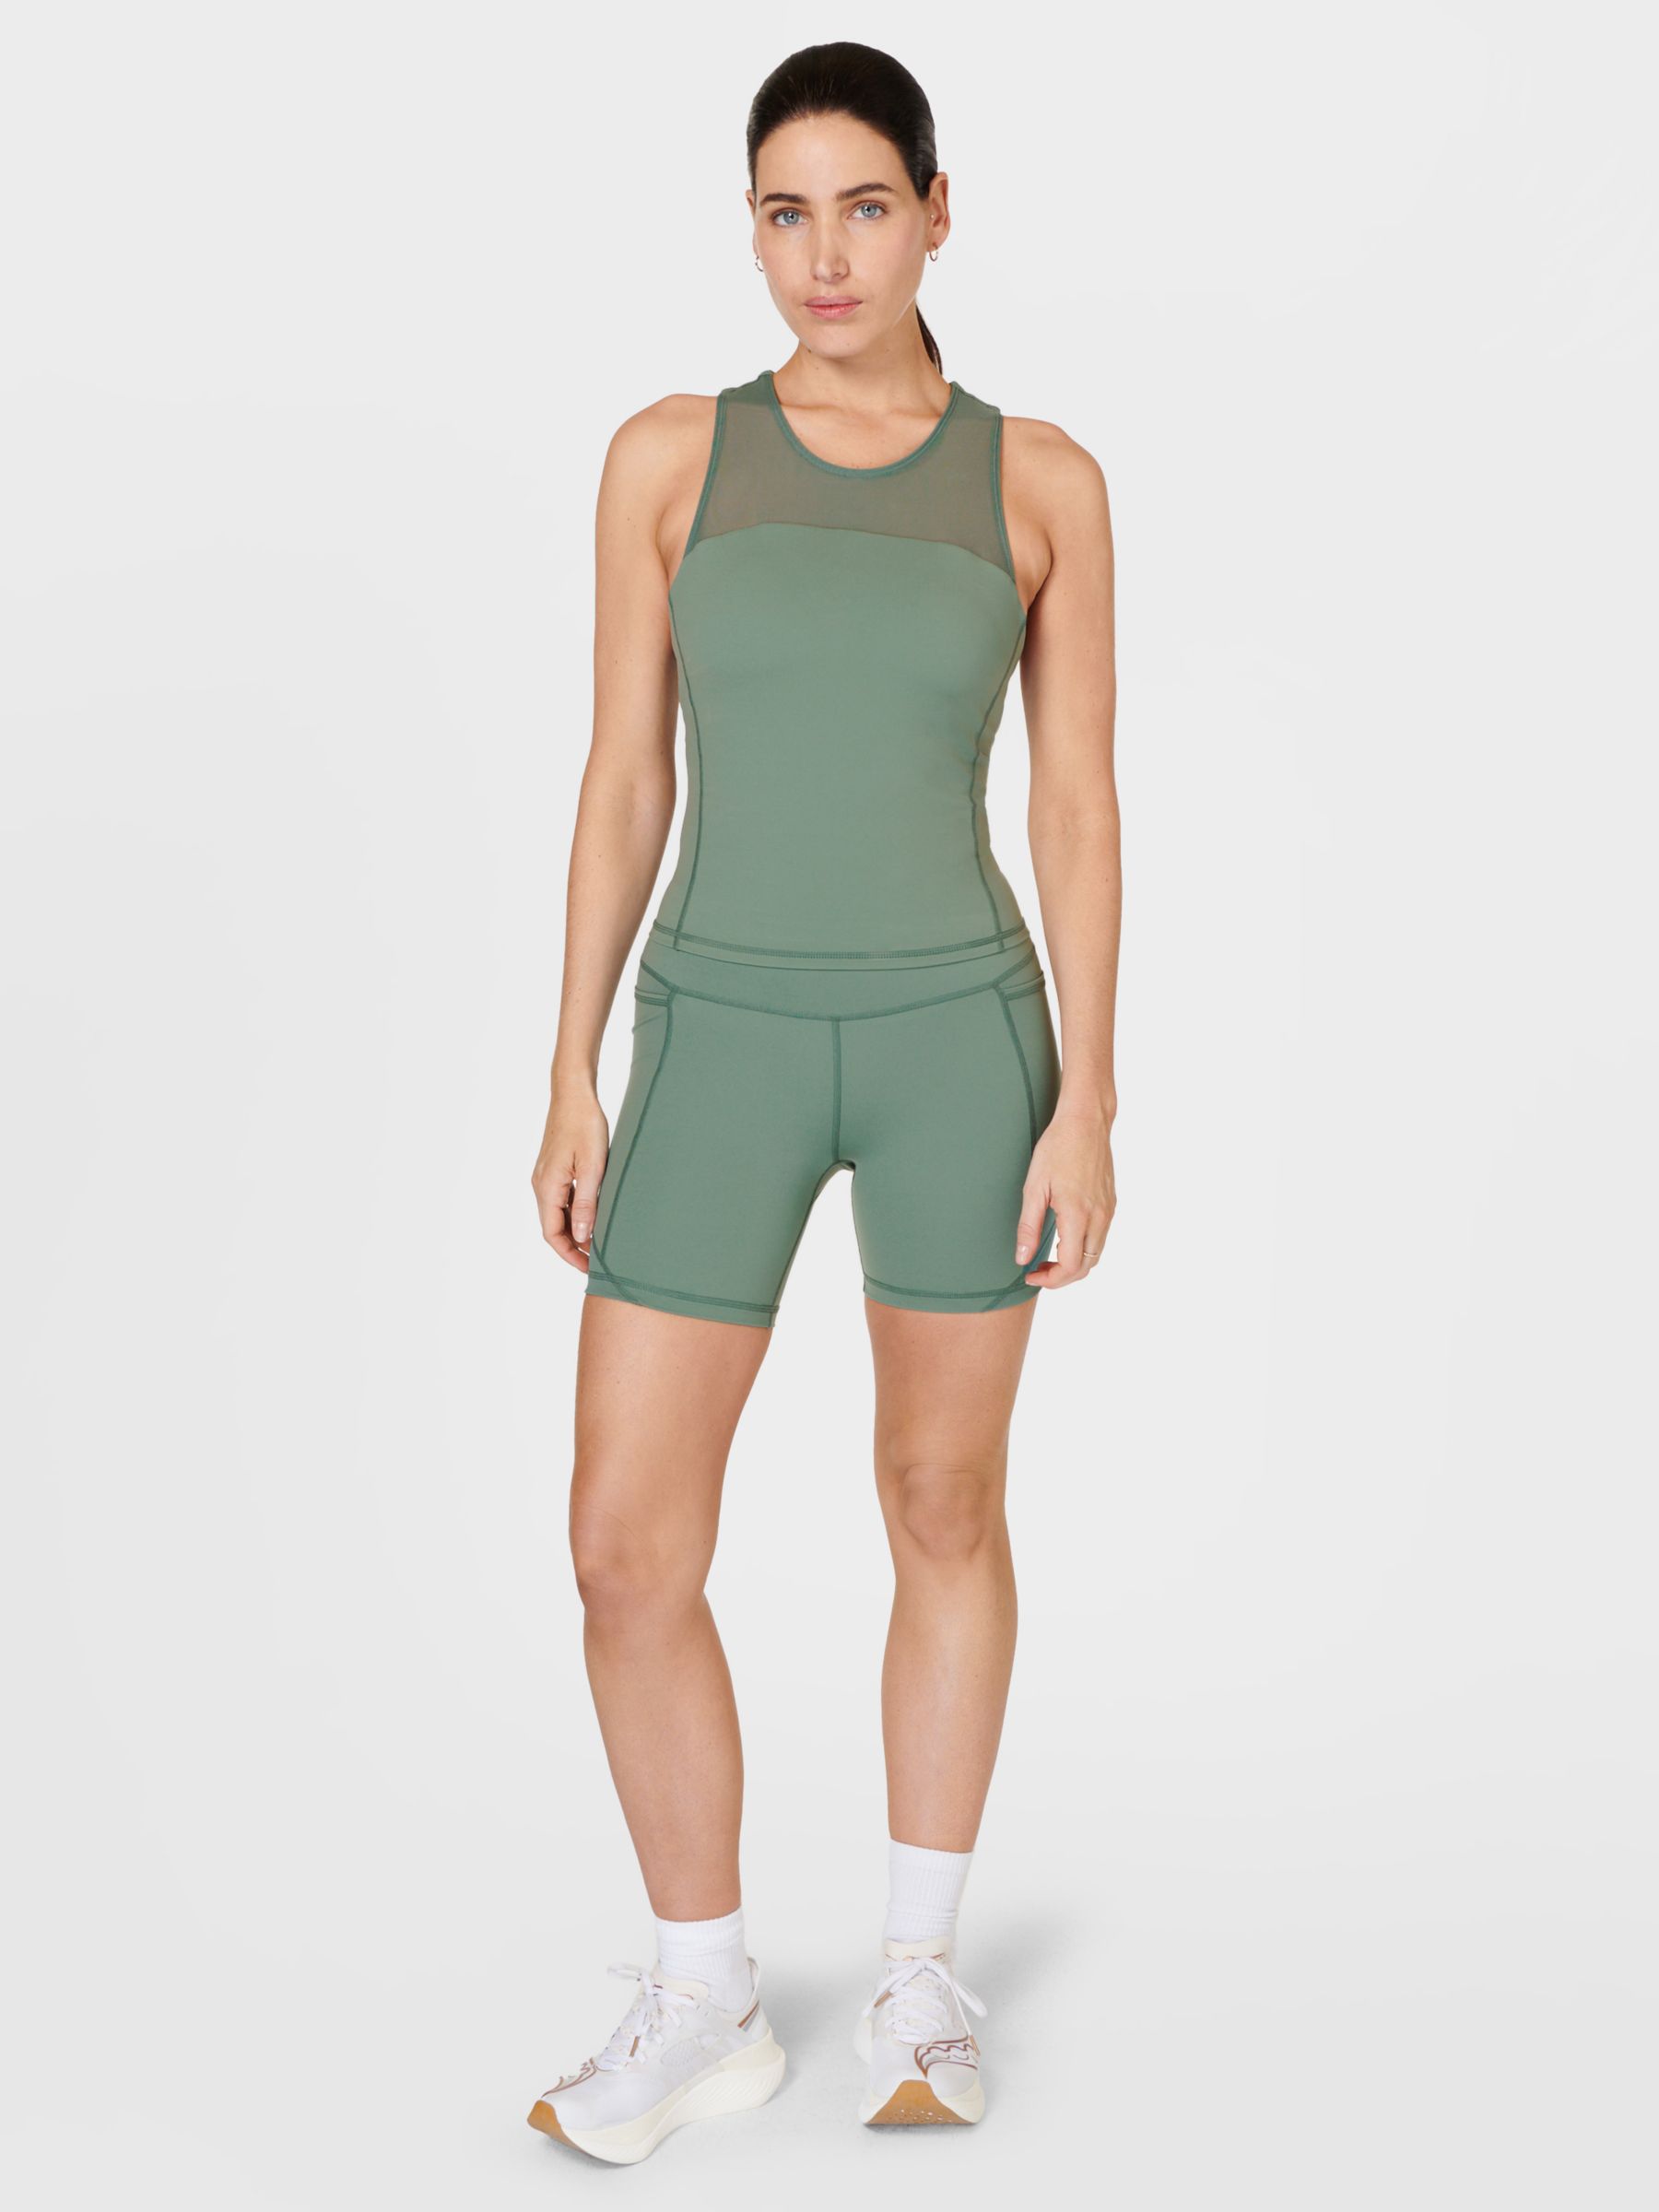 Sweaty Betty Aerial 6" Workout Shorts, Cool Forest Green, XXS